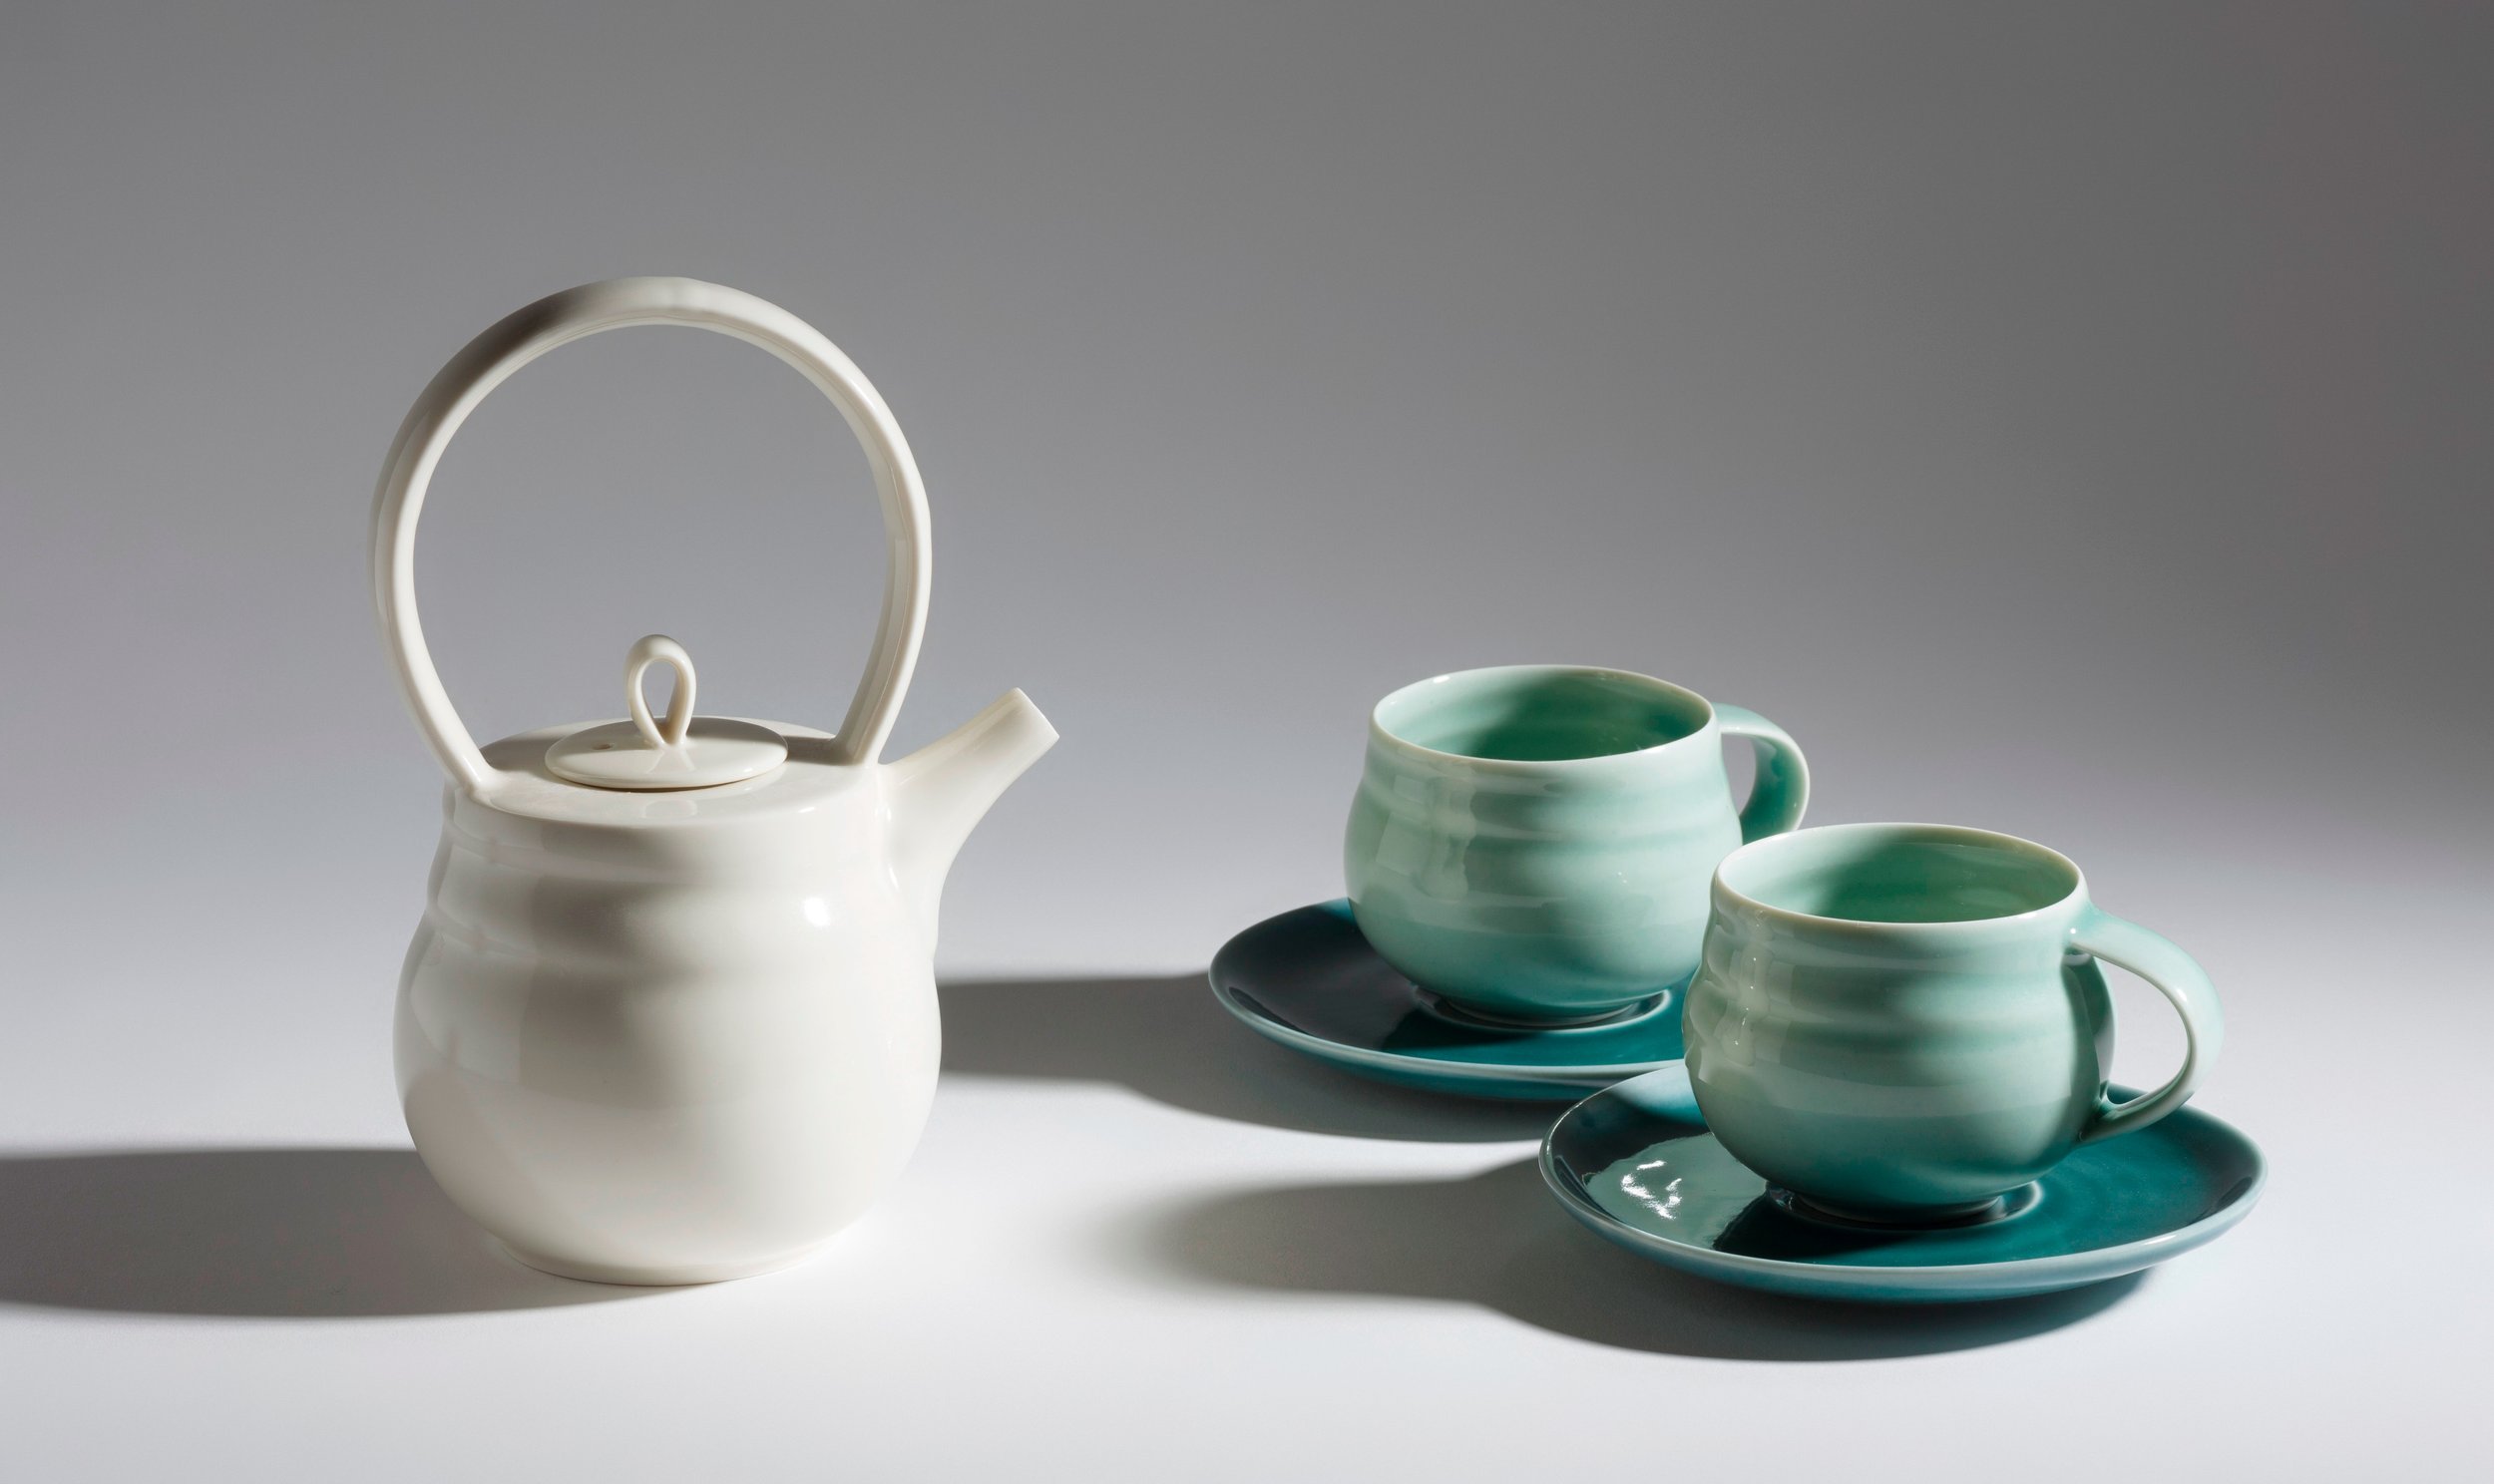 Porcelain teapot with cups and saucers